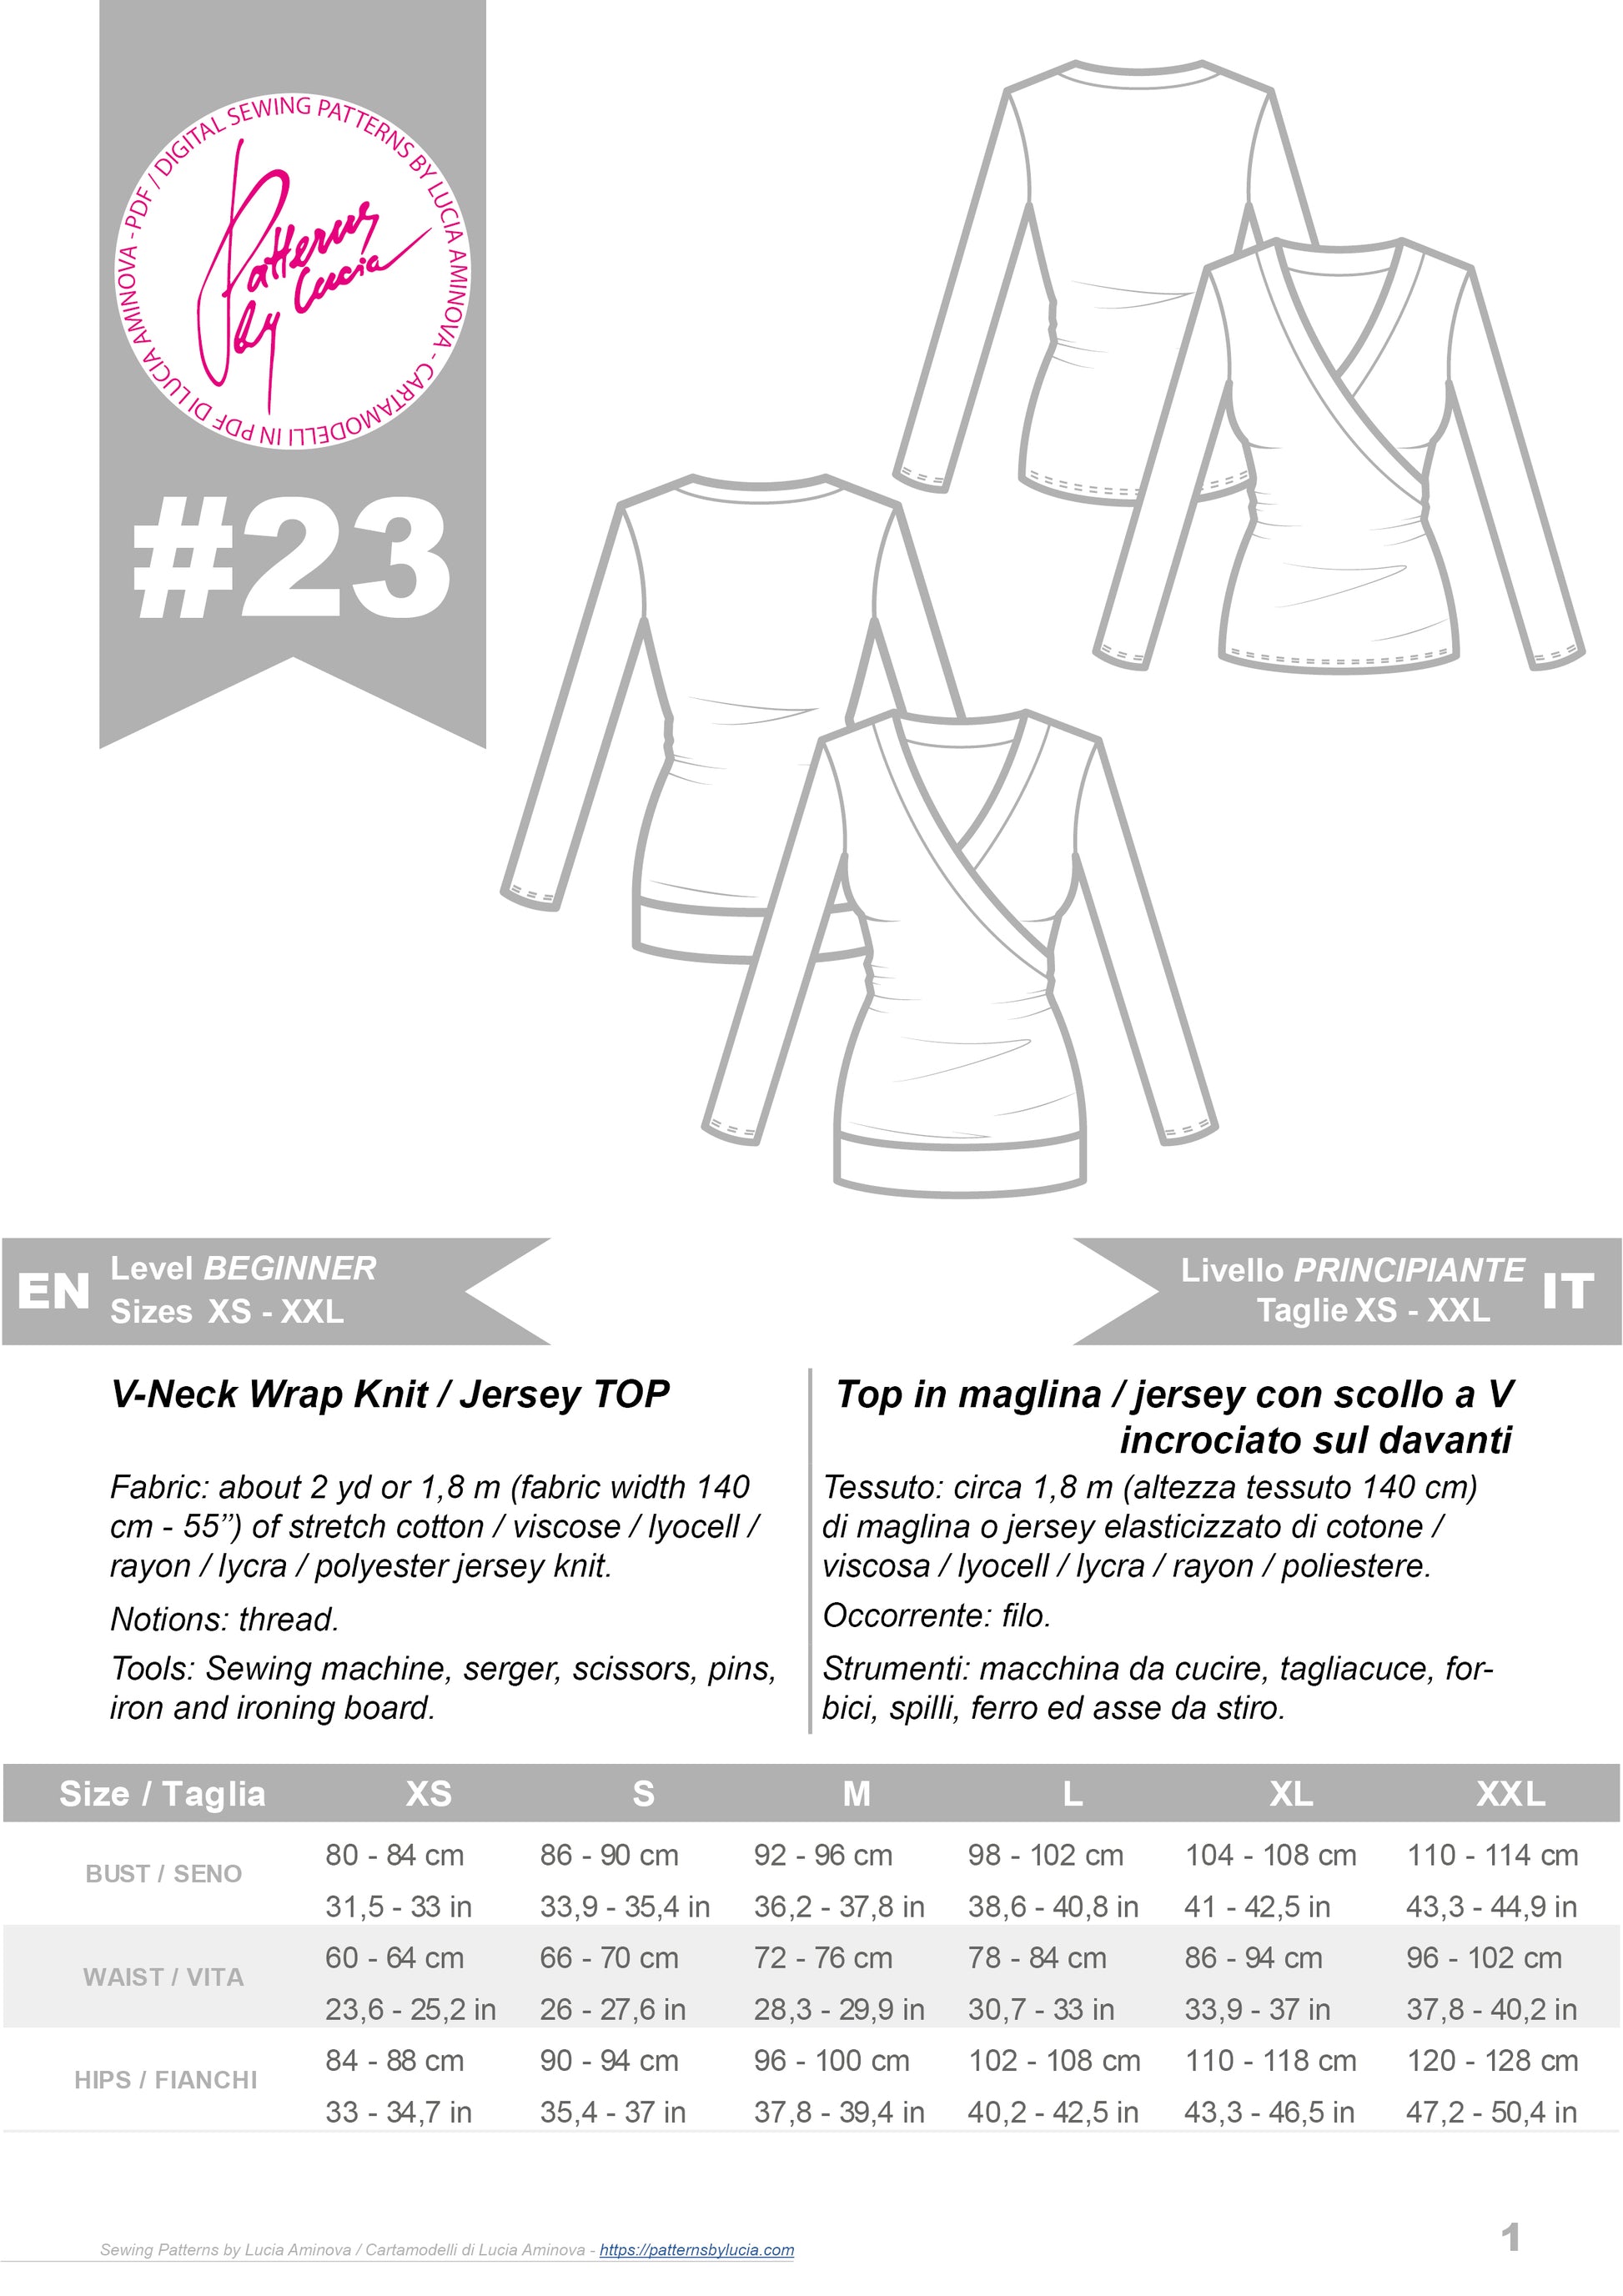 pdf sewing patterns by lucia